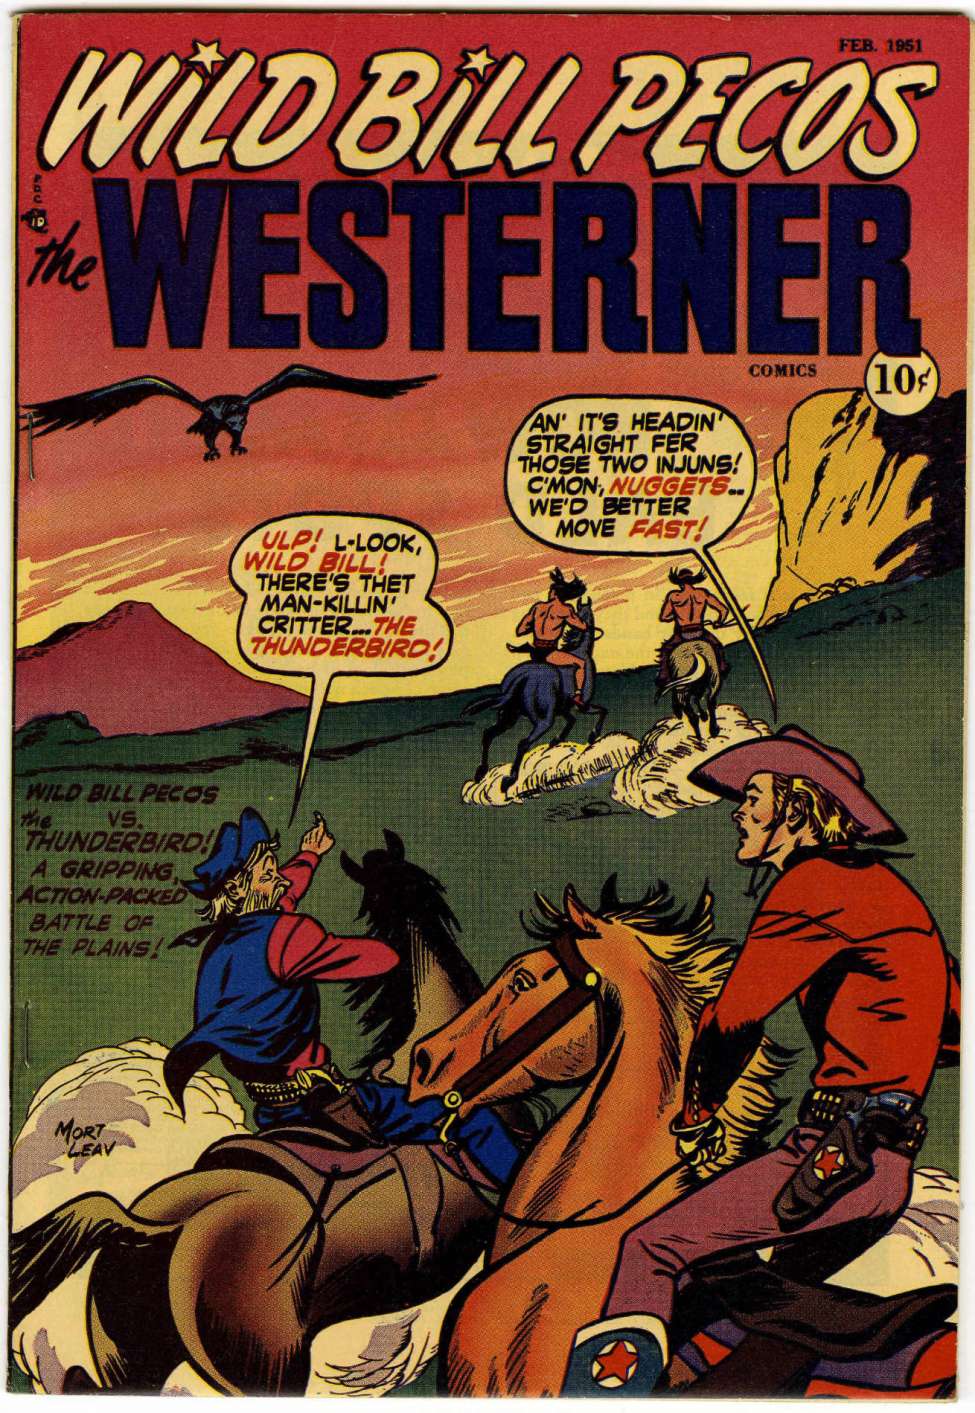 Book Cover For The Westerner 33 - Version 1